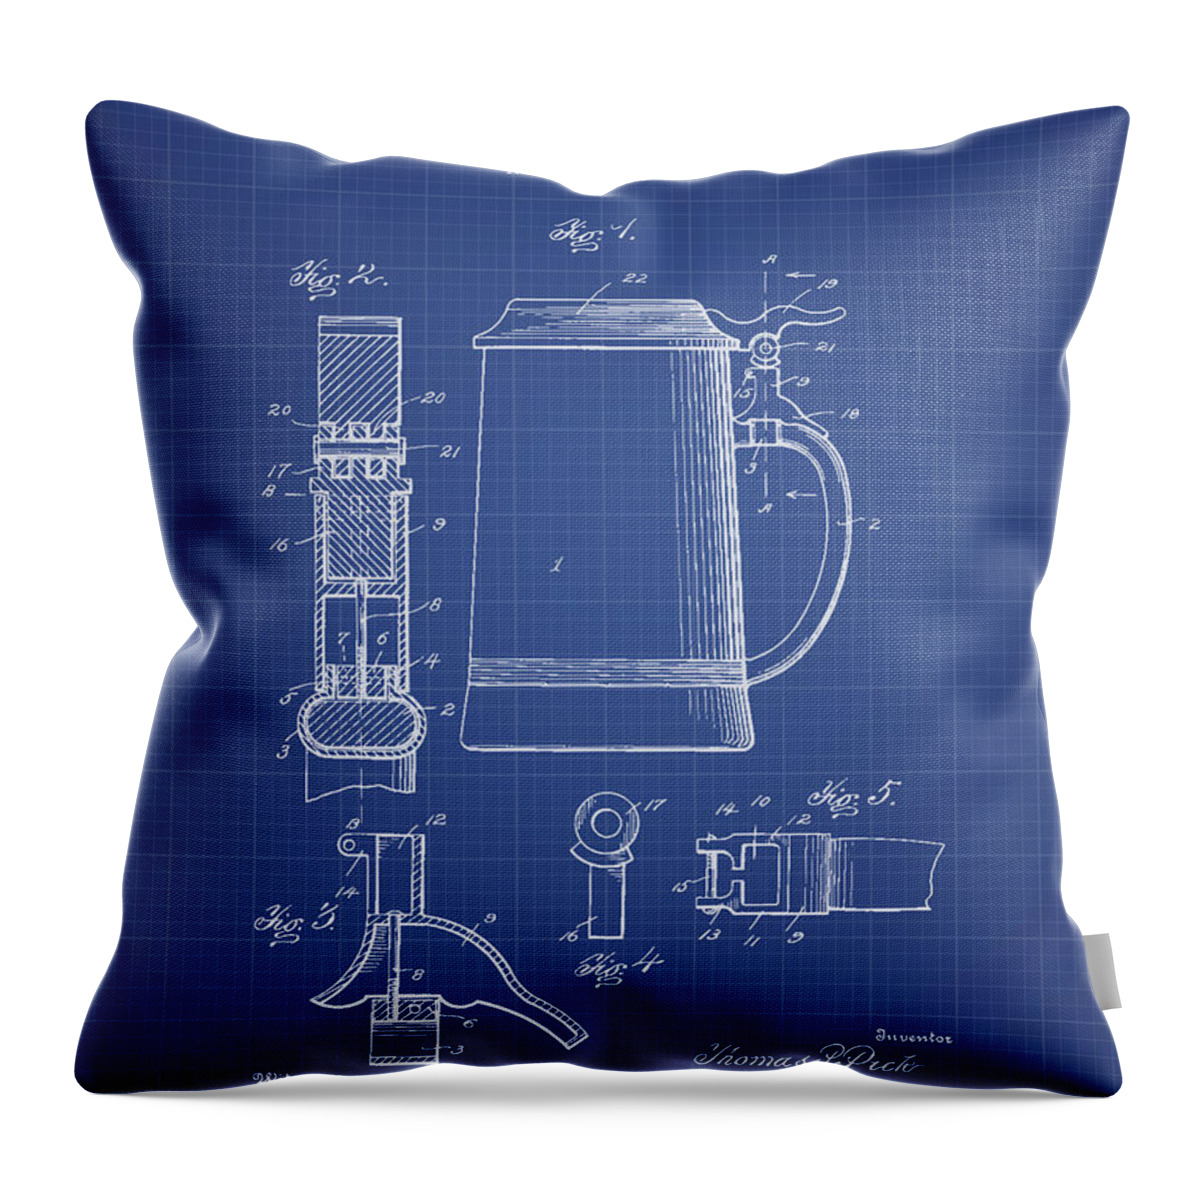 Beer Throw Pillow featuring the digital art Beer Stein Patent 1914 - Blueprint by Aged Pixel